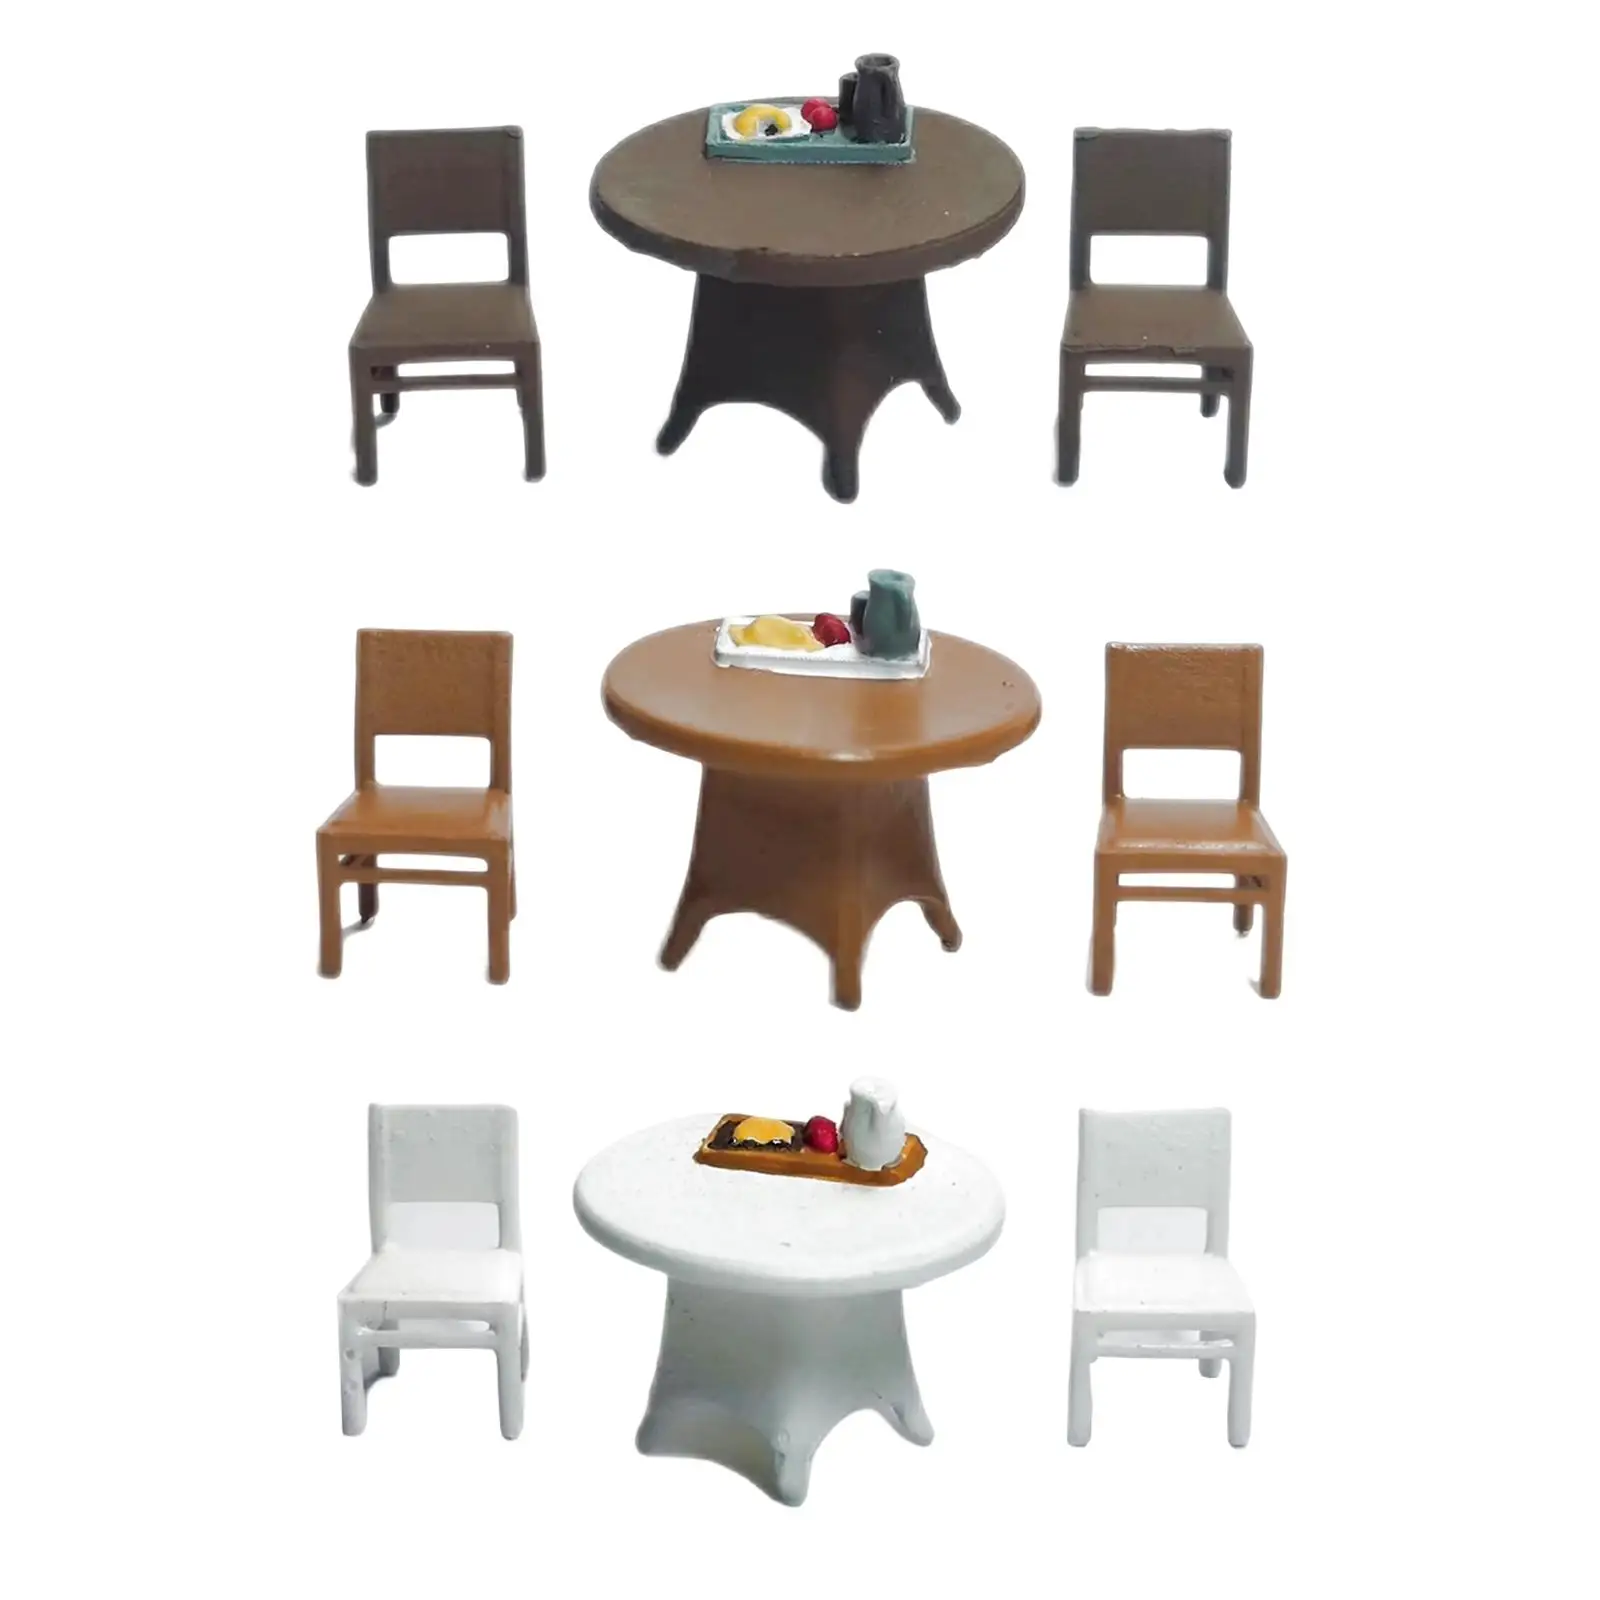 3x 1/64 Table and Chair Model Layout Decoration Trains Architectural Dioramas Collections DIY Projects Miniature Decoration